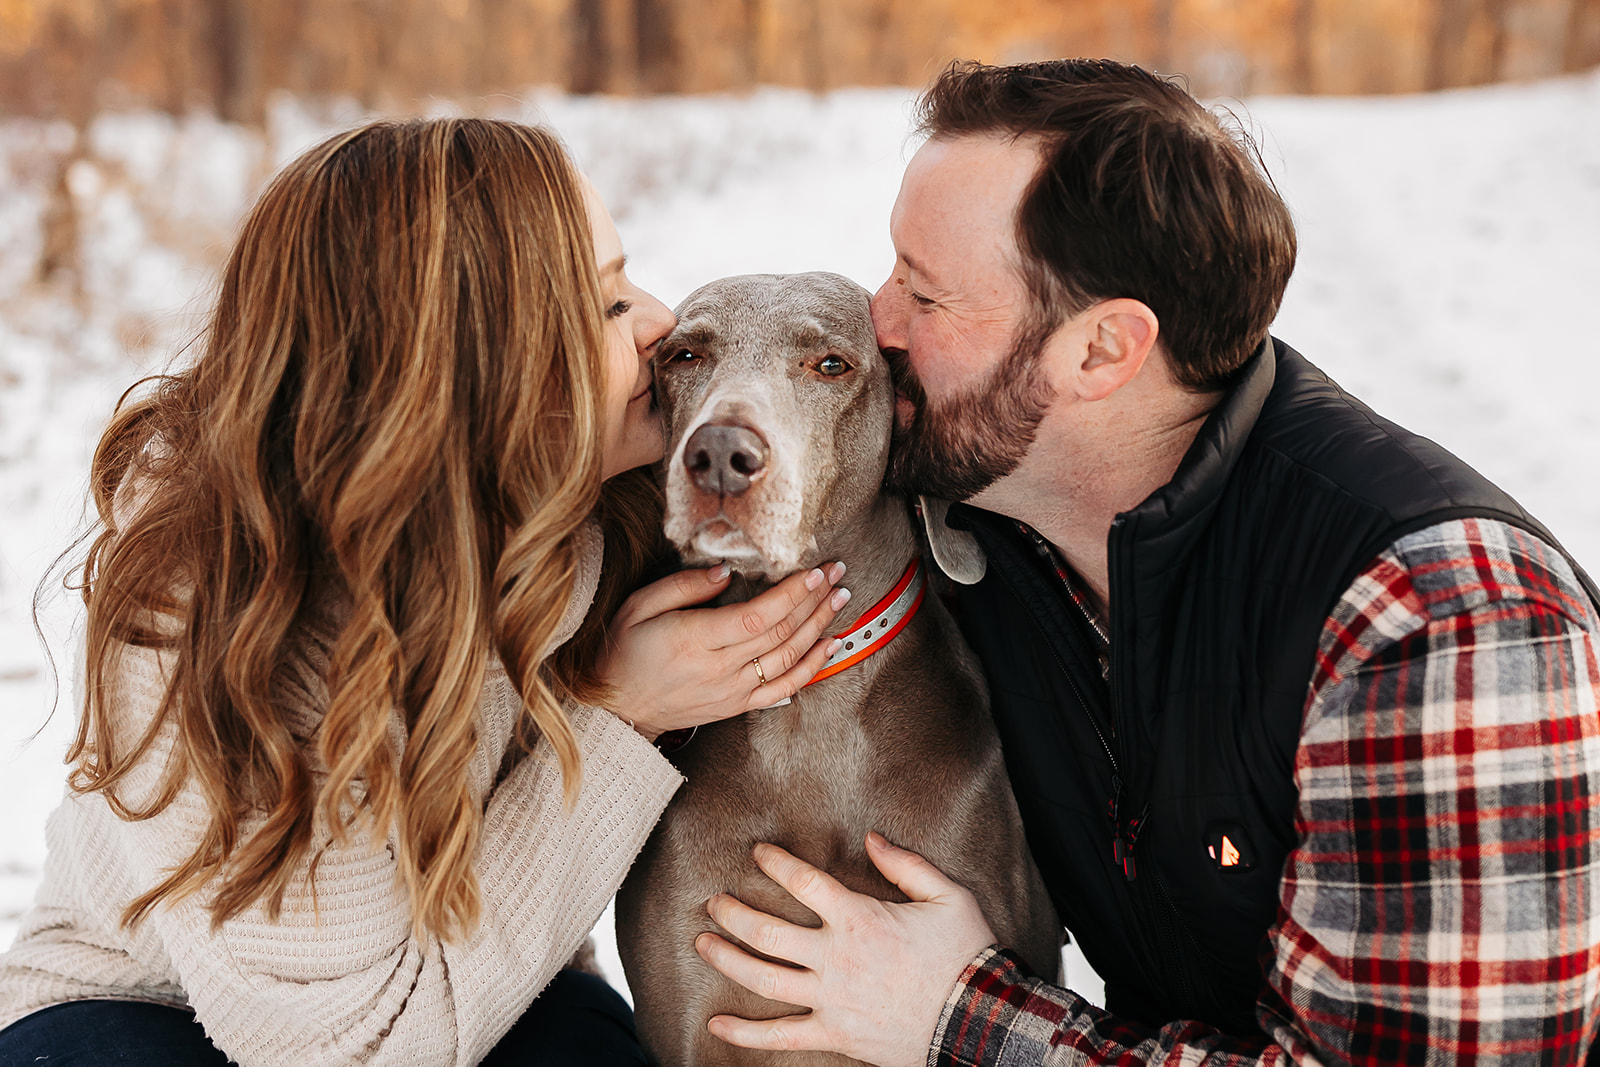 Man and woman kissing their dog which is between them in the snow.